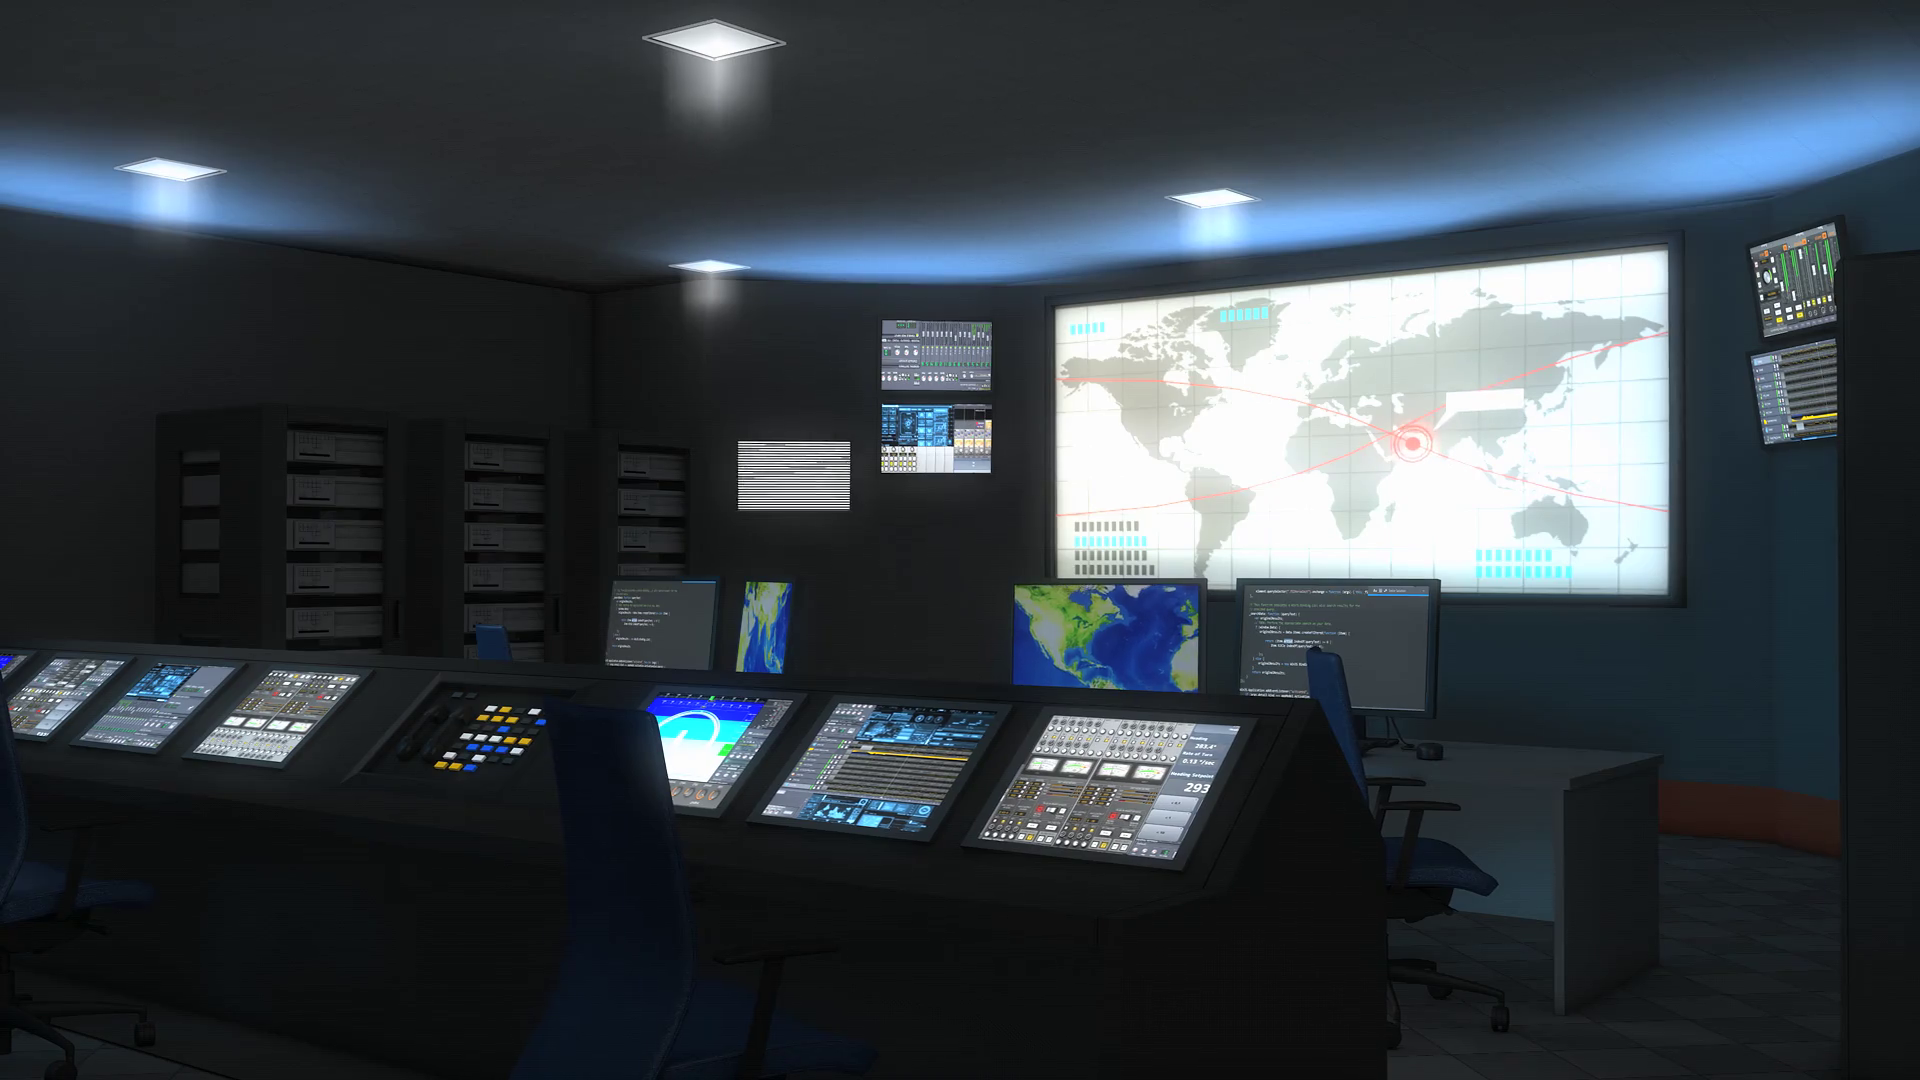 Command center(enhanced version), control, military, monitor